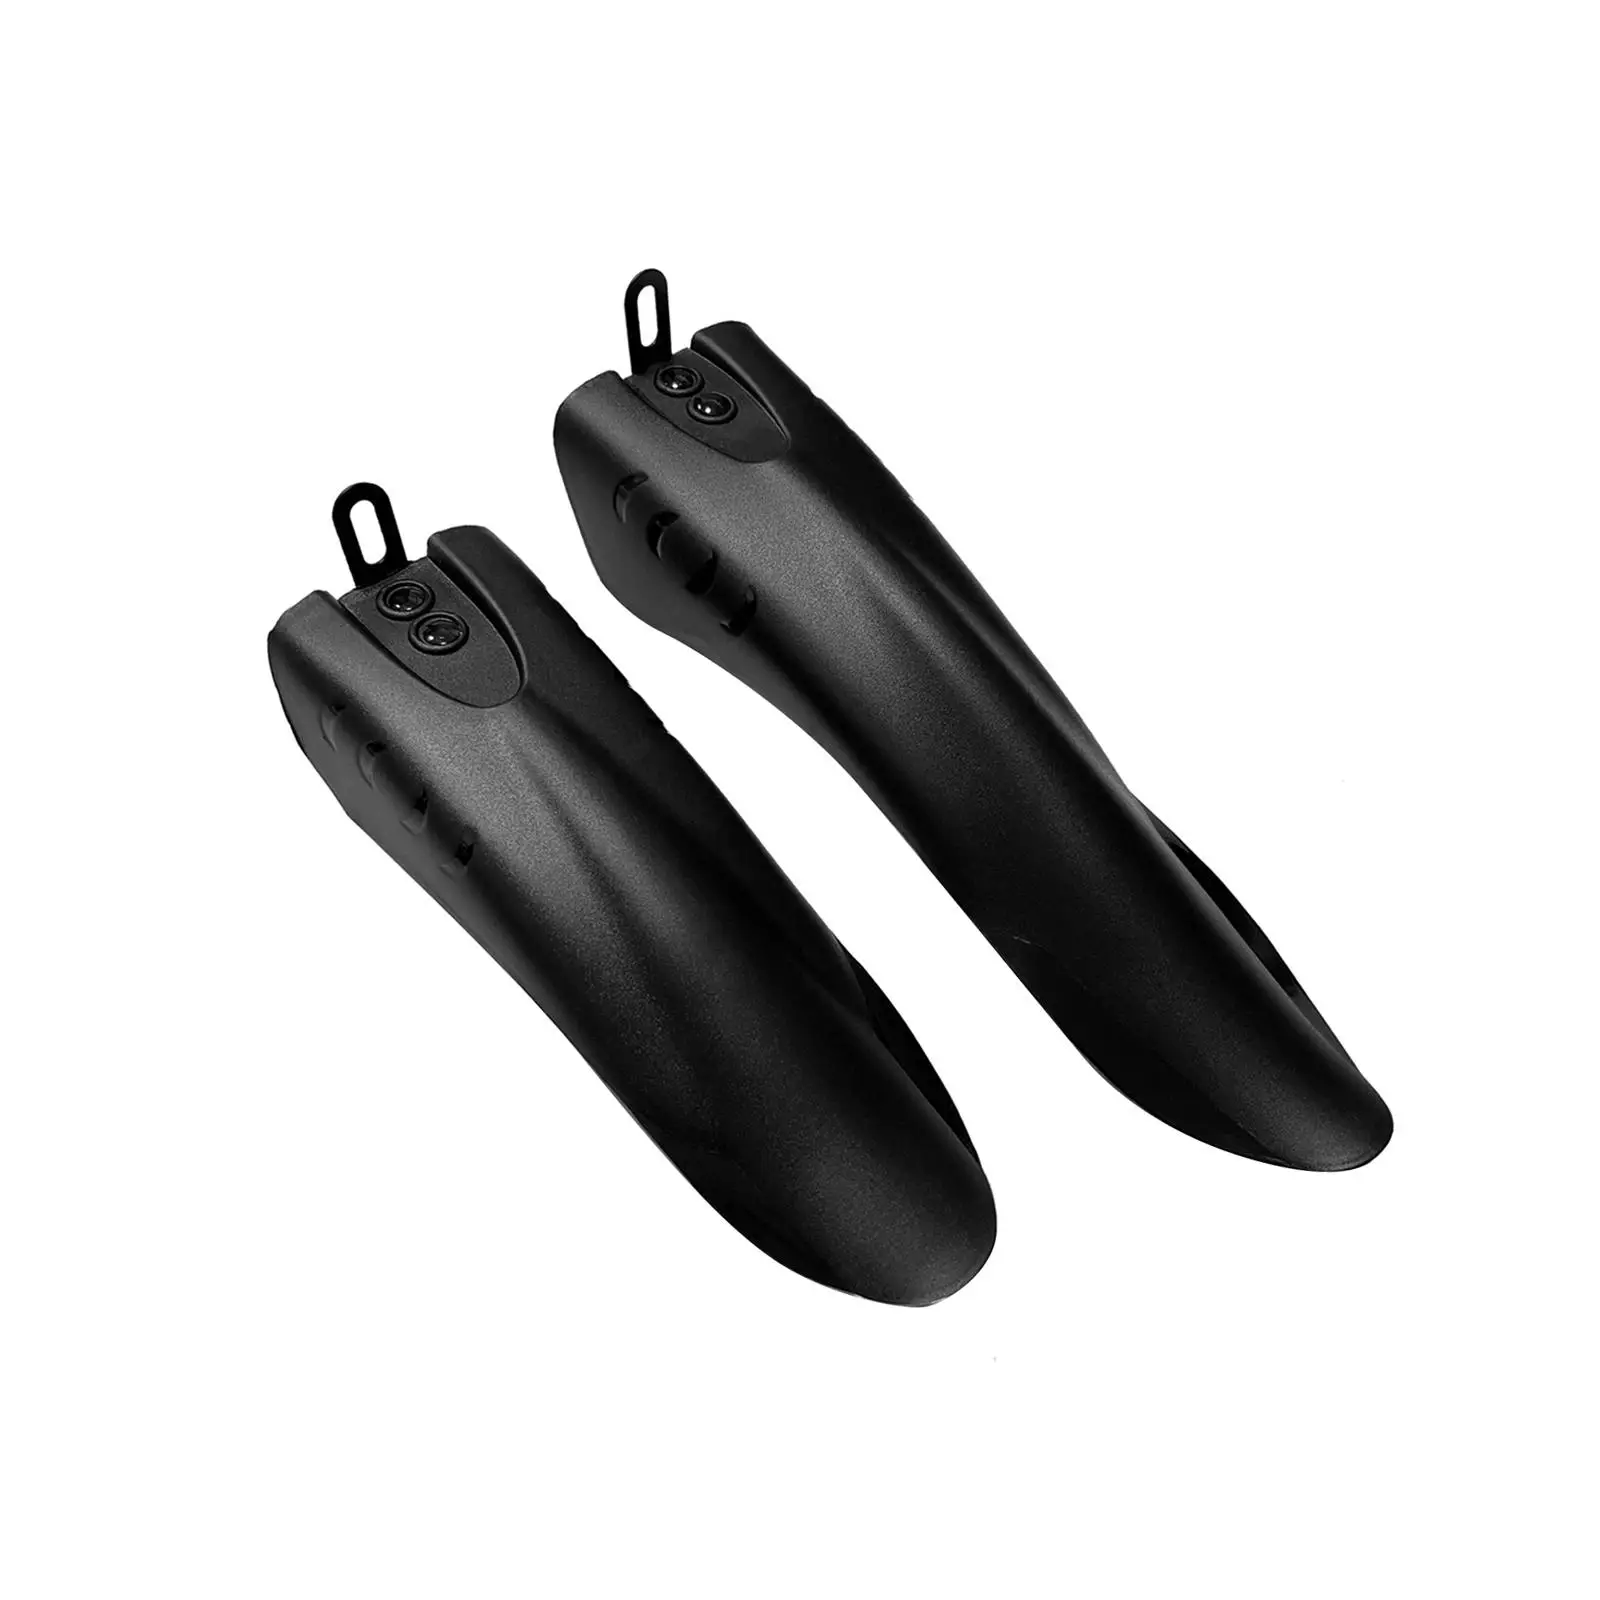 Mountain Bike Mudguard Set Durable Accs Components Simple Installation Fenders for Mountain Bike Riding Outdoor Sports